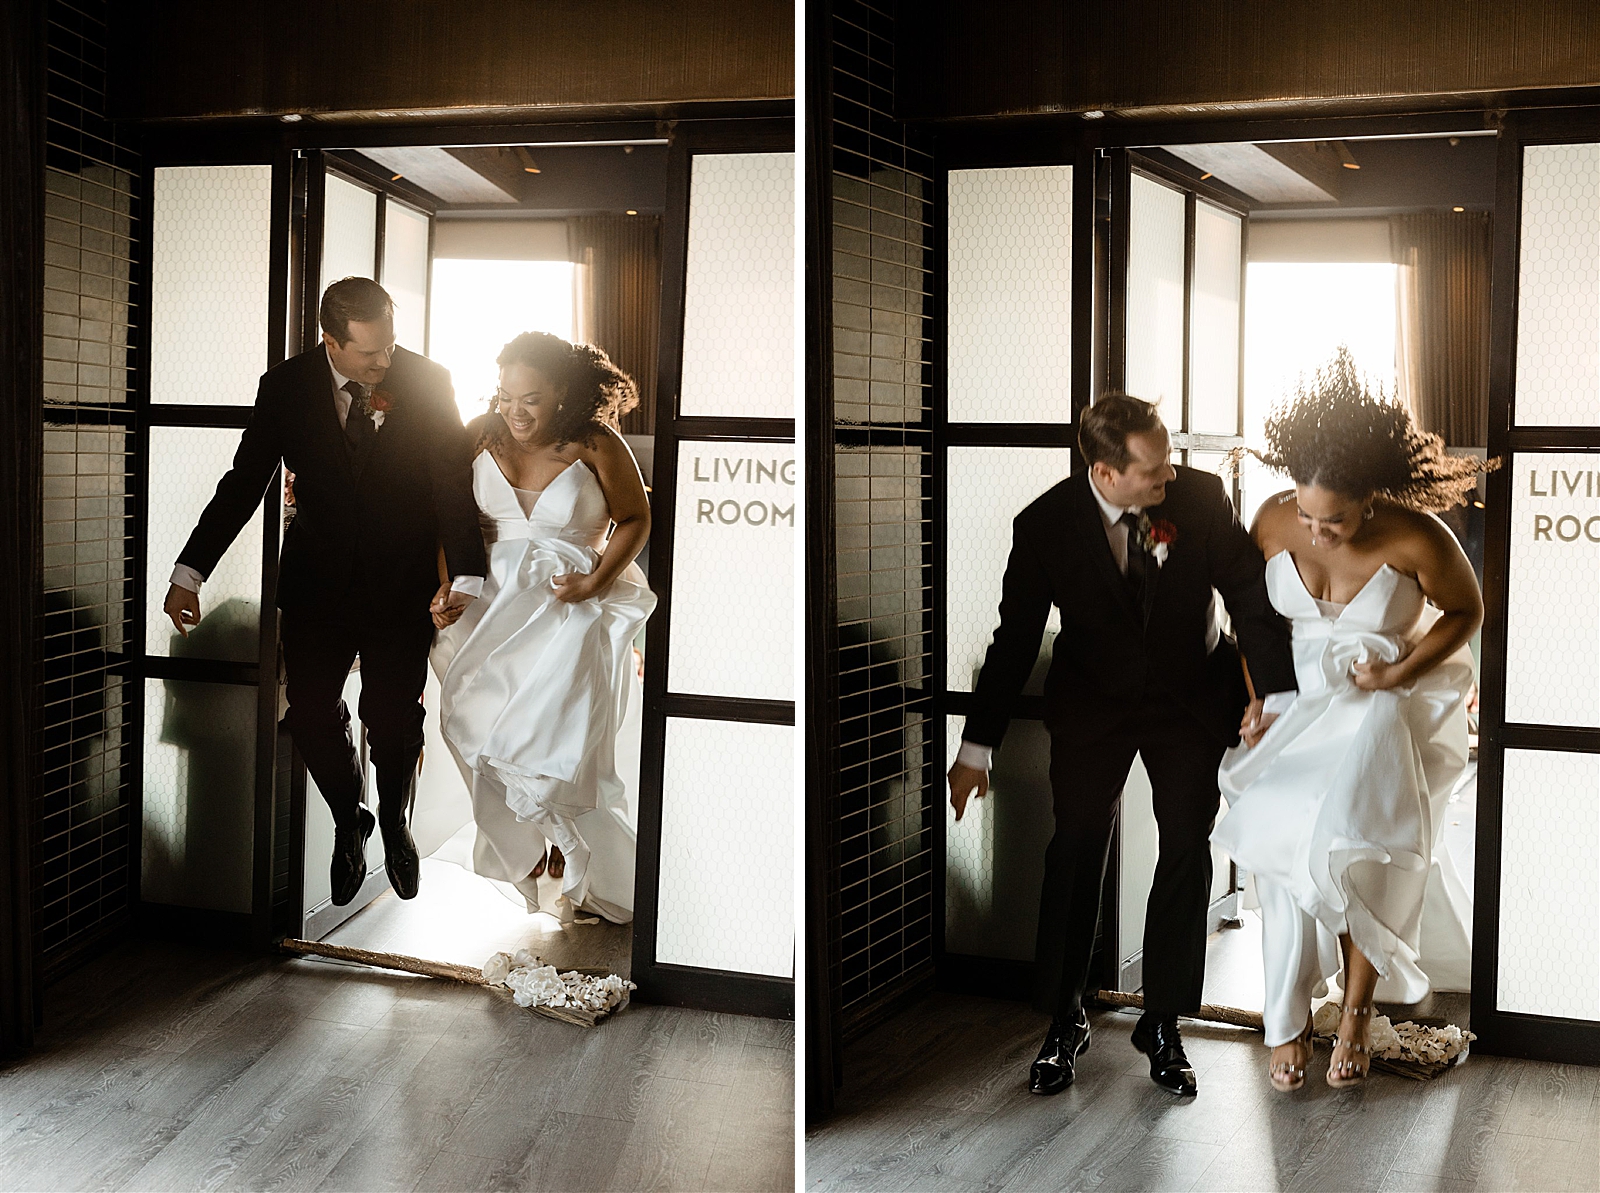 Left photo: Bride and Groom holding hands as they jump over a broom. 
Right photo: Bride and Groom holding hands as they jump over a broom. 